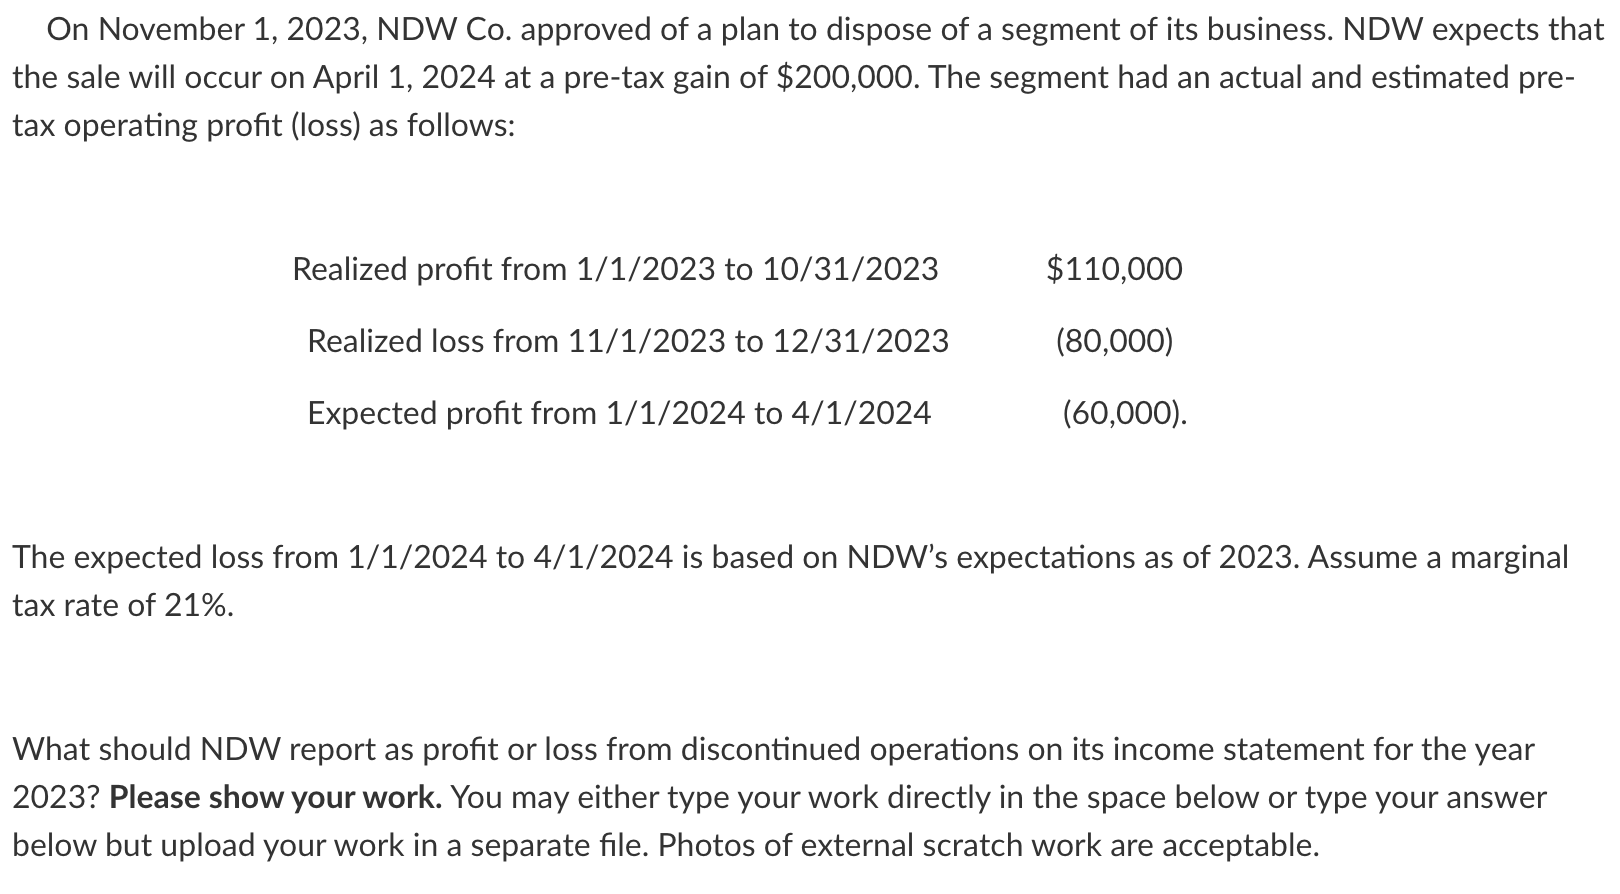 On November 1, 2023, NDW Co. approved of a plan to dispose of a segment of its business. NDW expects that the